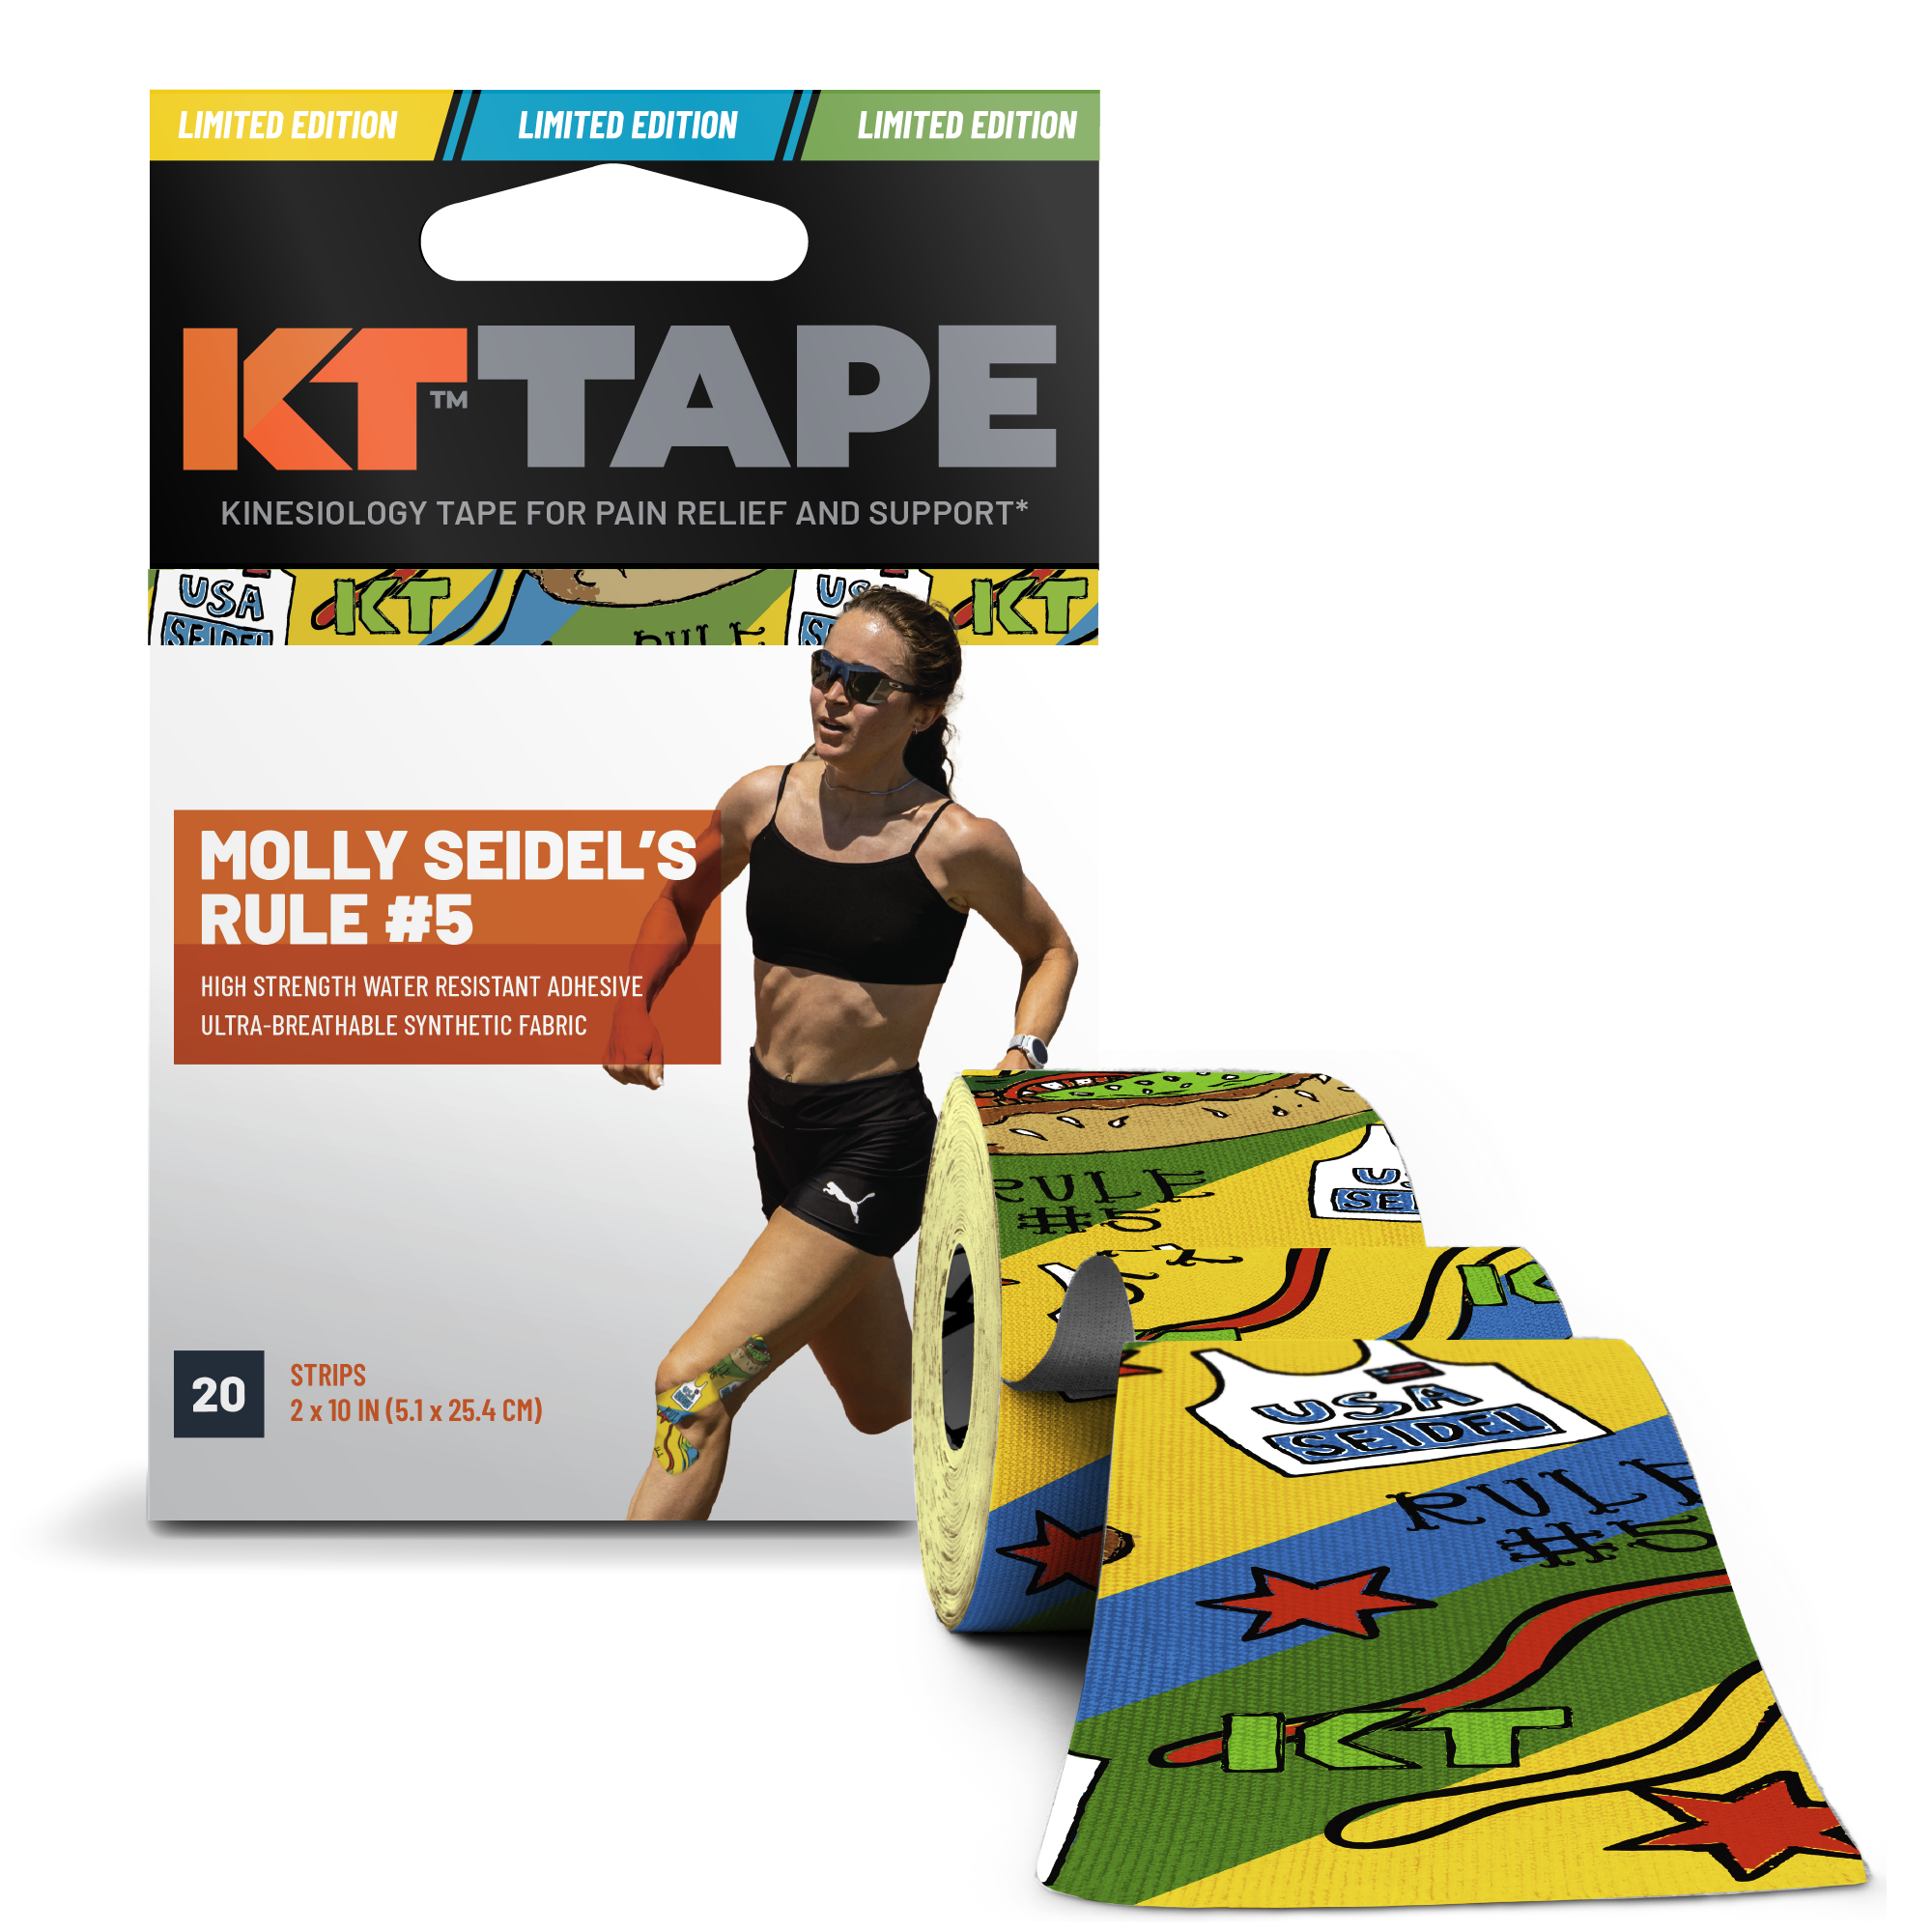  KT Tape KT Recovery+ Wave™ Electromagnetic Pain Relief